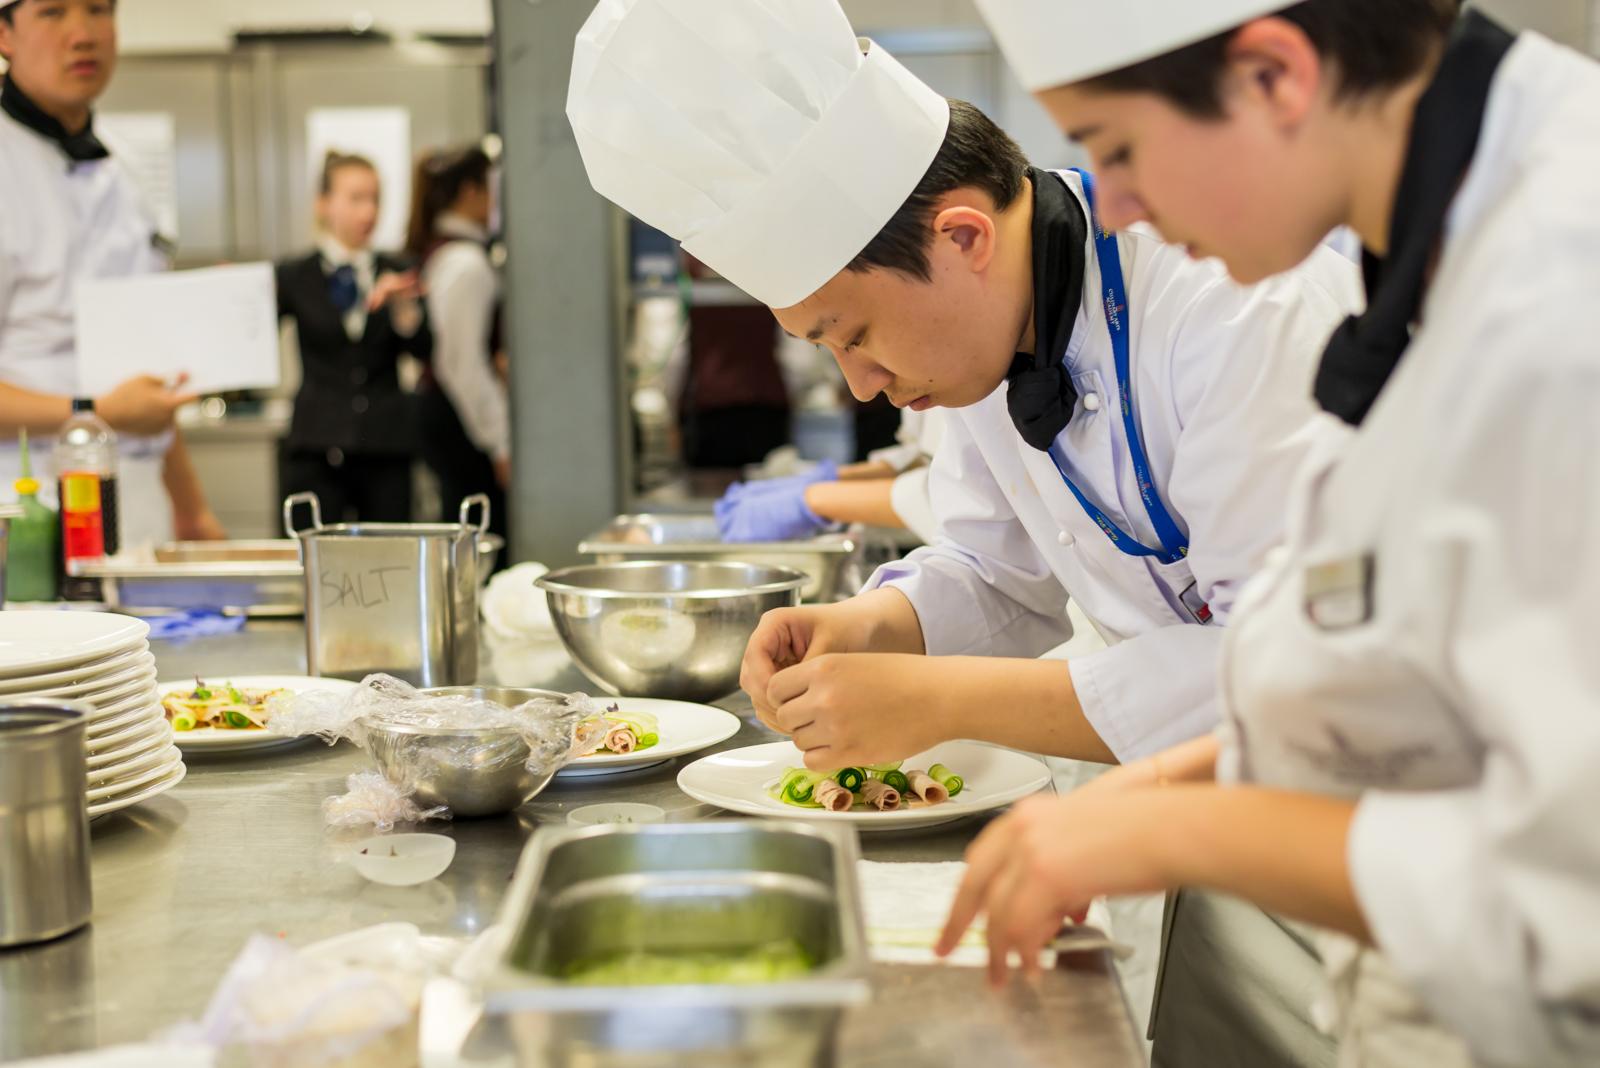 Culinary students preparing meal